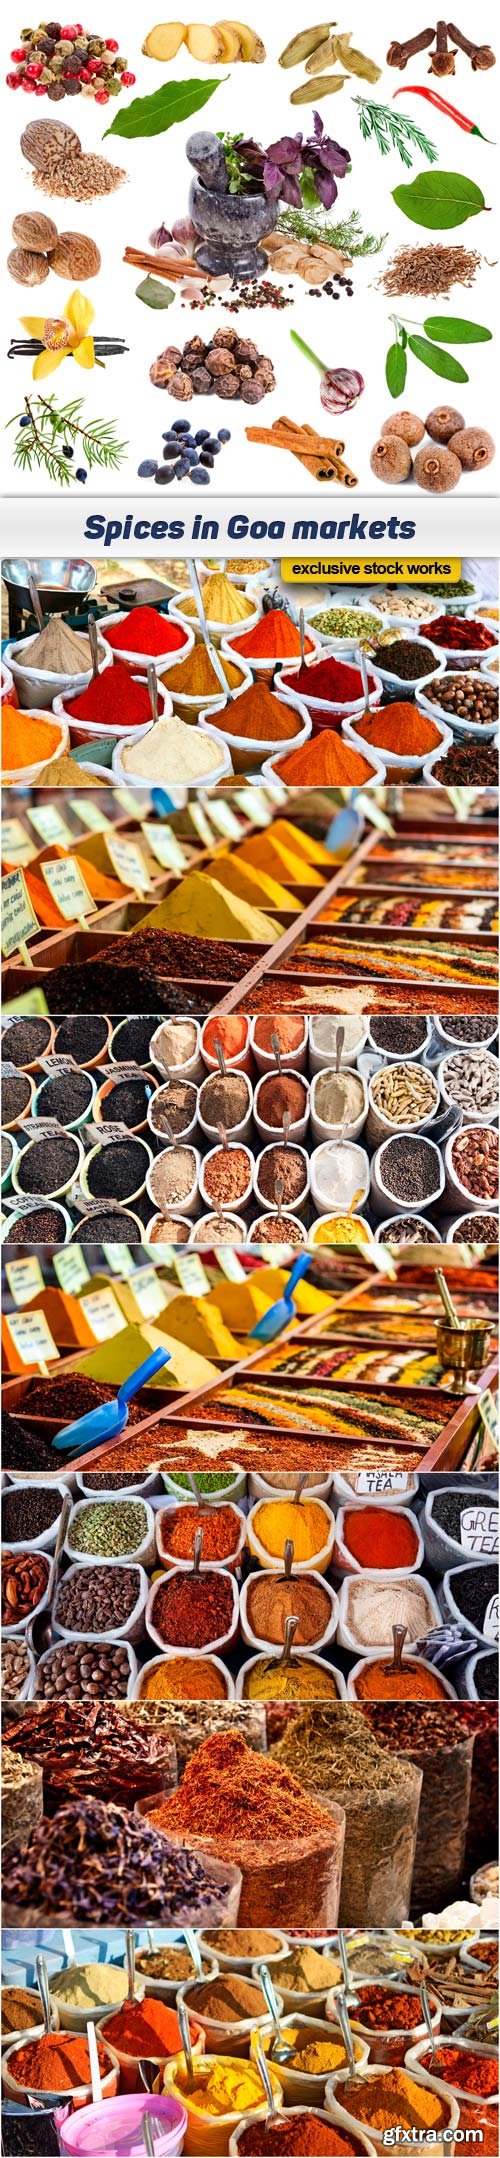 Spices in Goa markets 8x JPEG